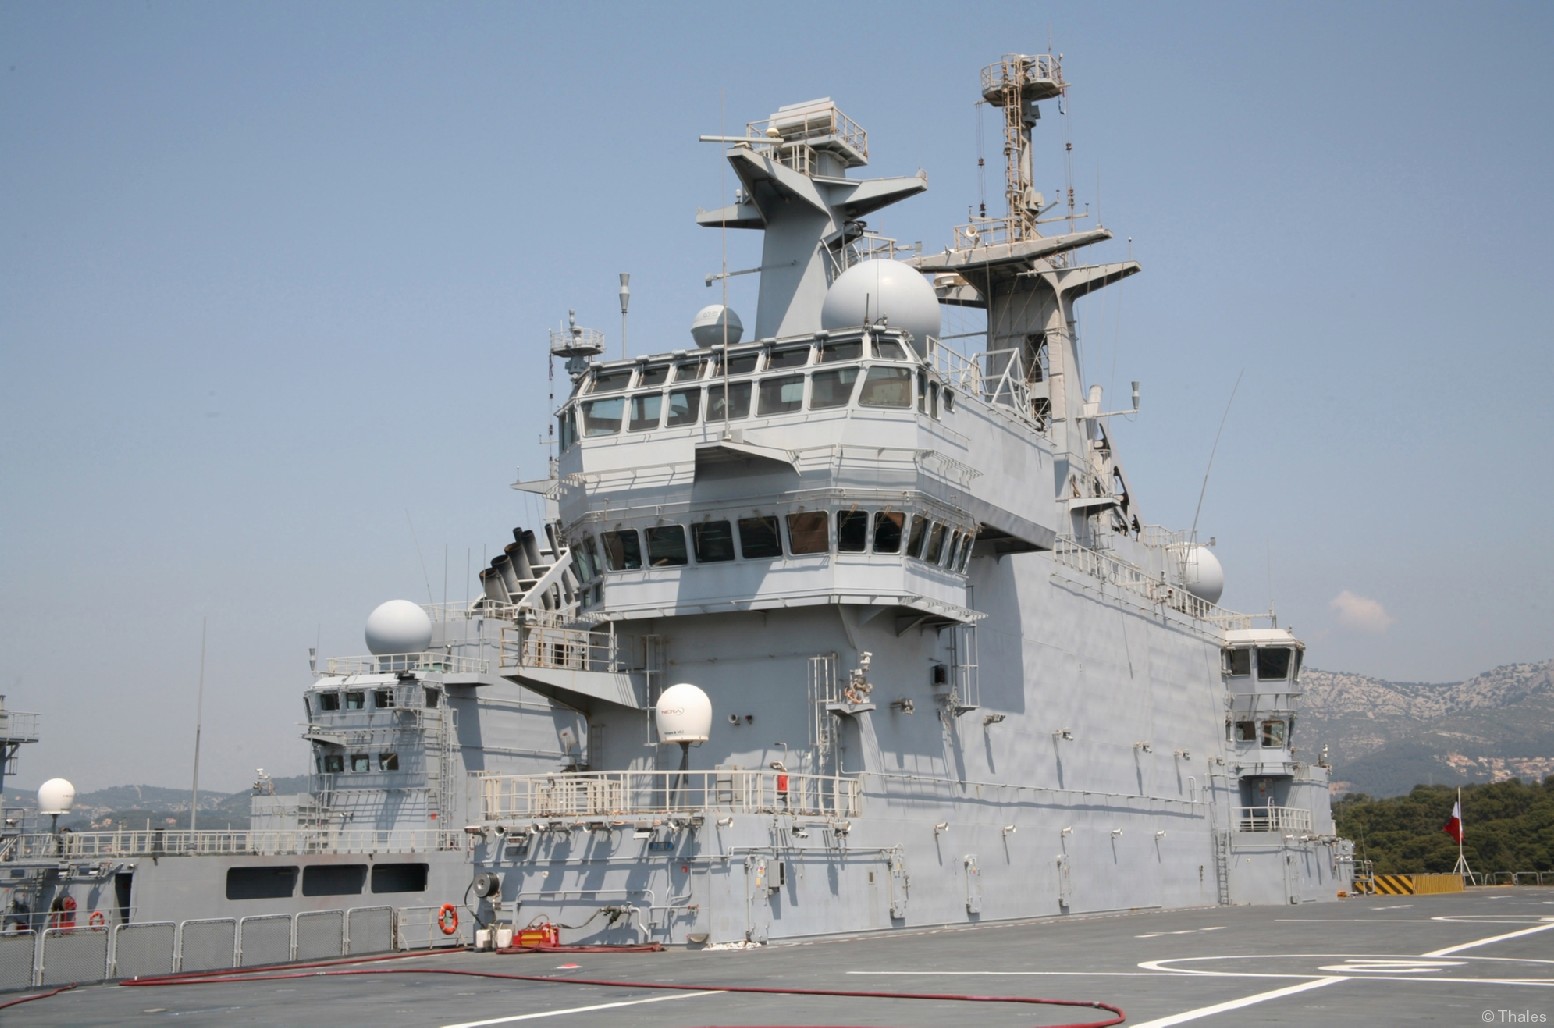 l-9013 fs mistral amphibious assault command ship french navy marine nationale 44 island superstructure